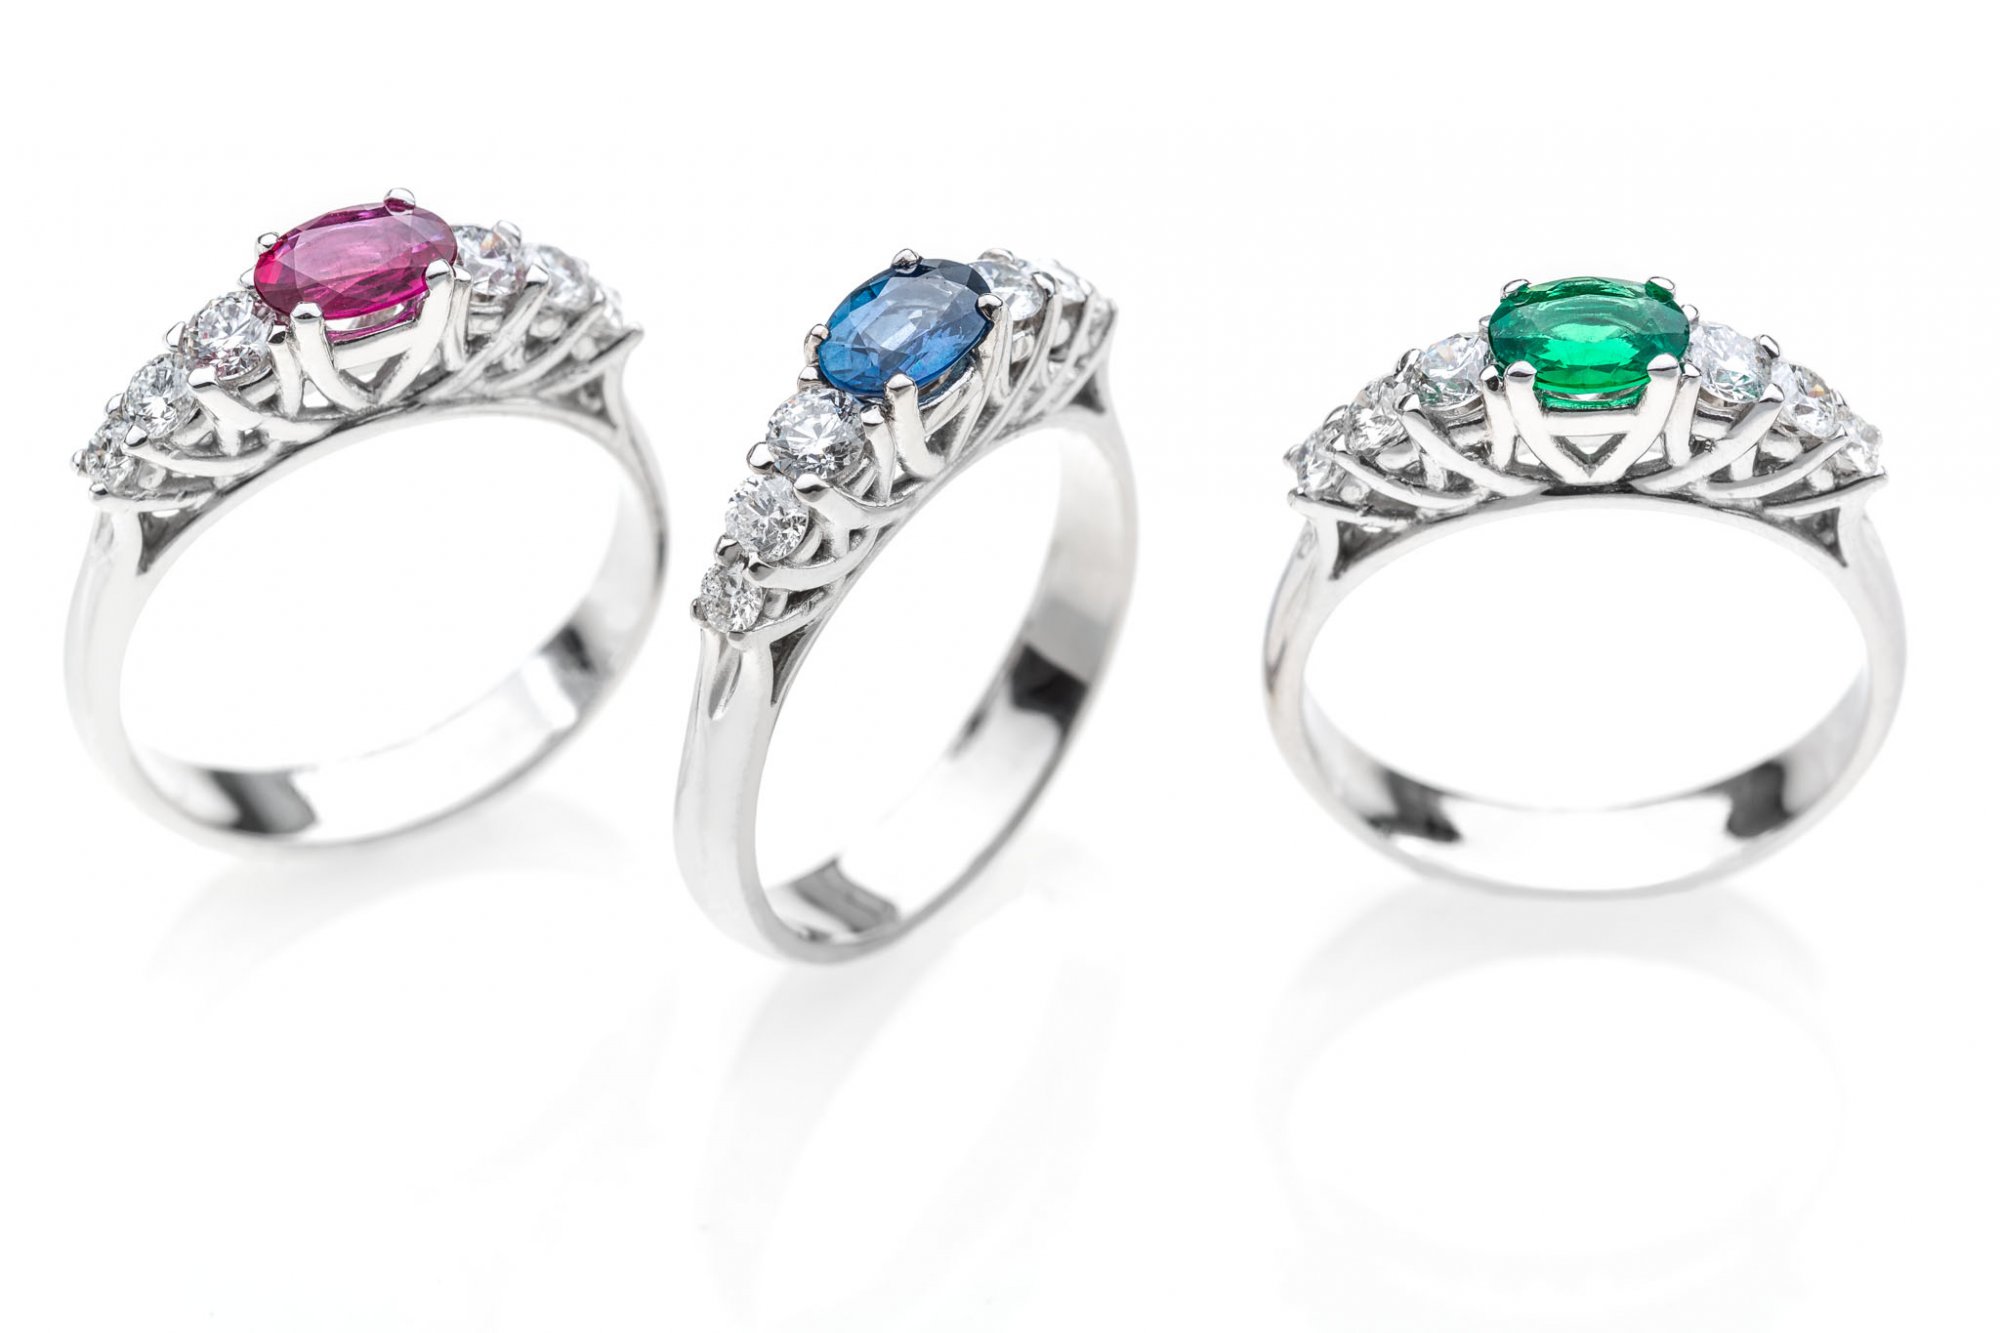 18 KT white gold rings with ruby,sapphire,emerald and round brilliant cut diamonds